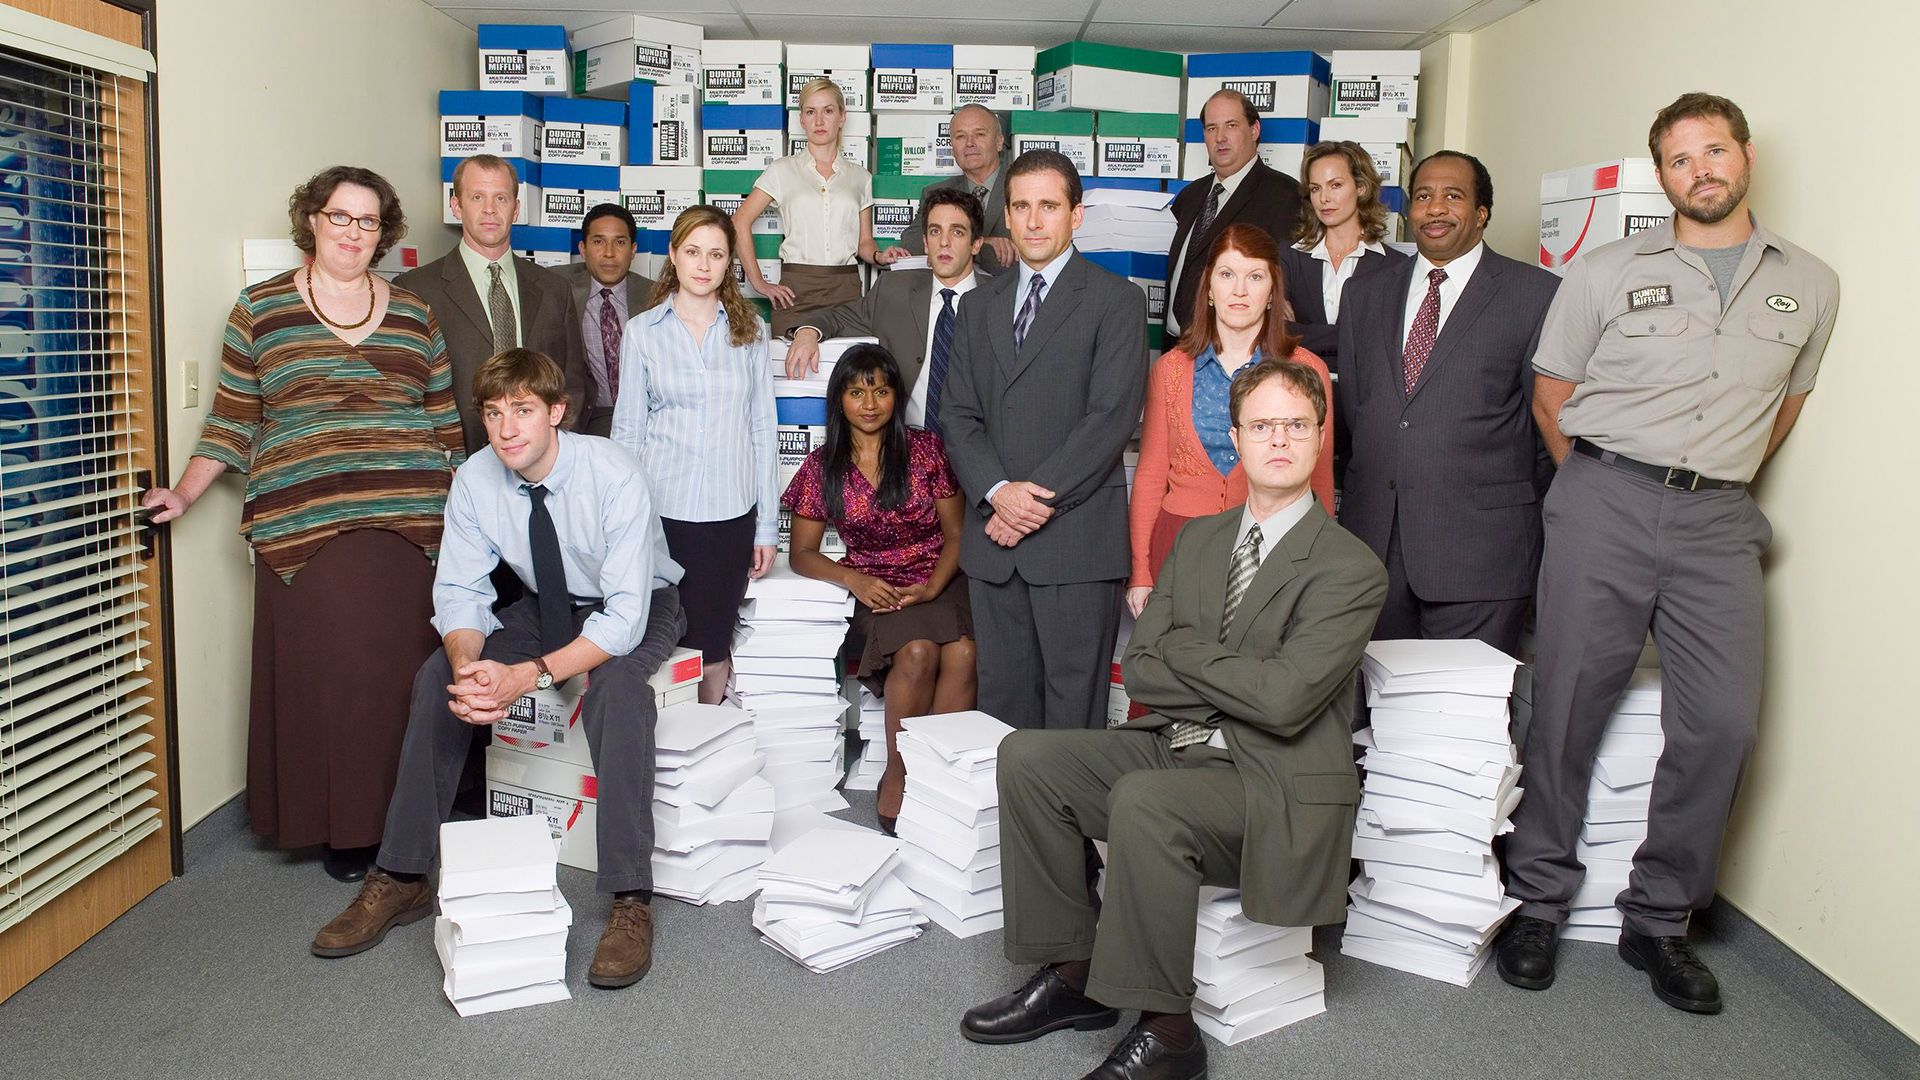 Top 10 Facts About The Office Every Fans Should Know  - 2